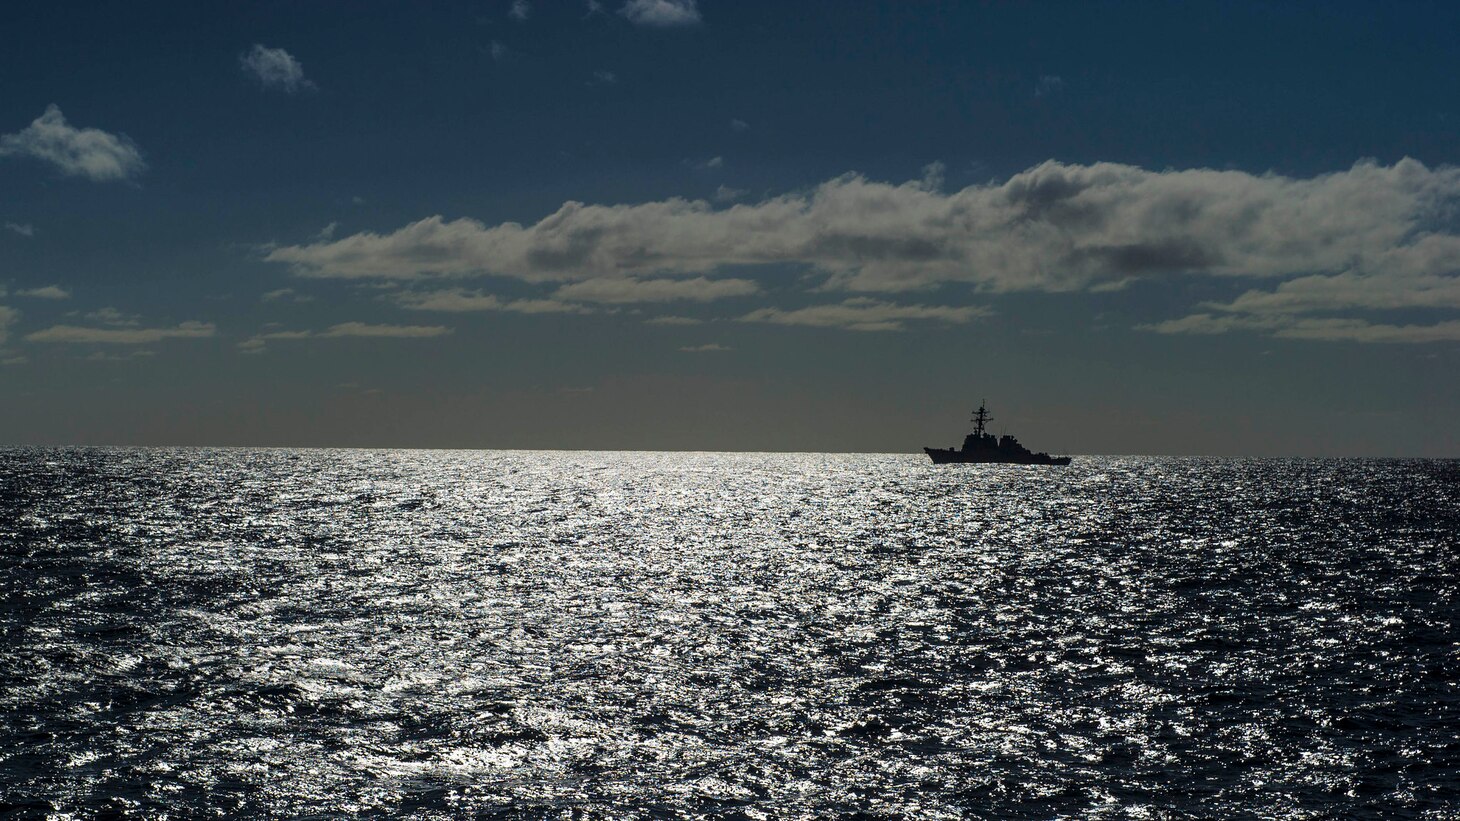 The guided missile destroyer USS Arleigh Burke (DDG 51) transits the Atlantic Ocean.